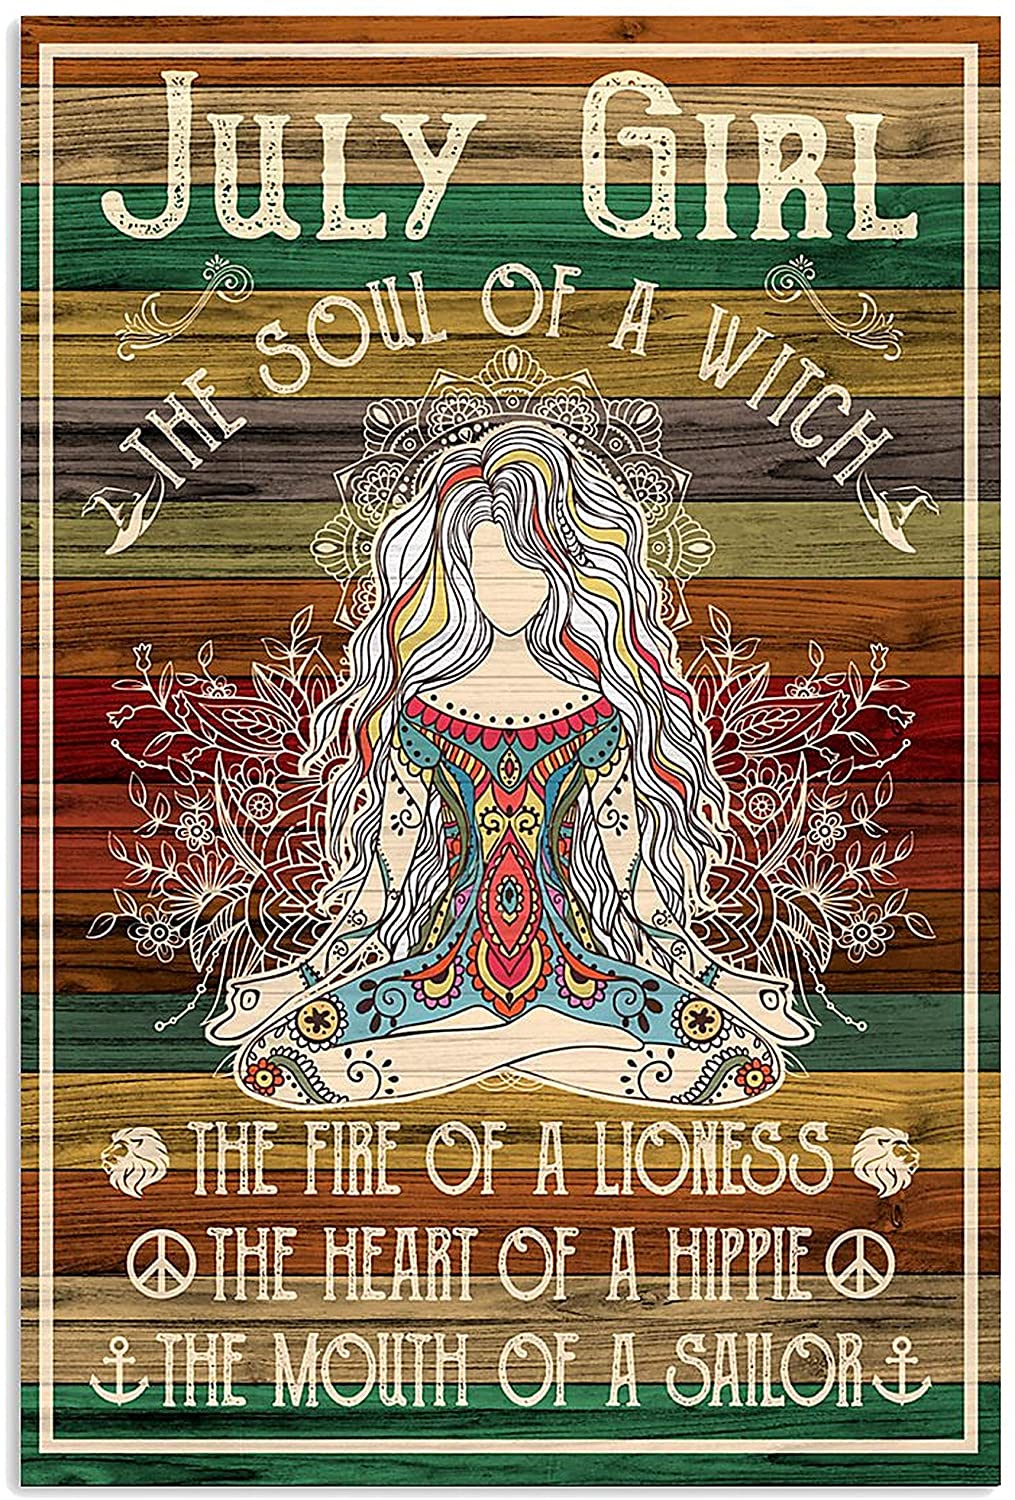 Yoga July Girl The Soul of A Witch The Fire of A Lioness The Heart of A Hippie The Mouth of A Sailor Poster